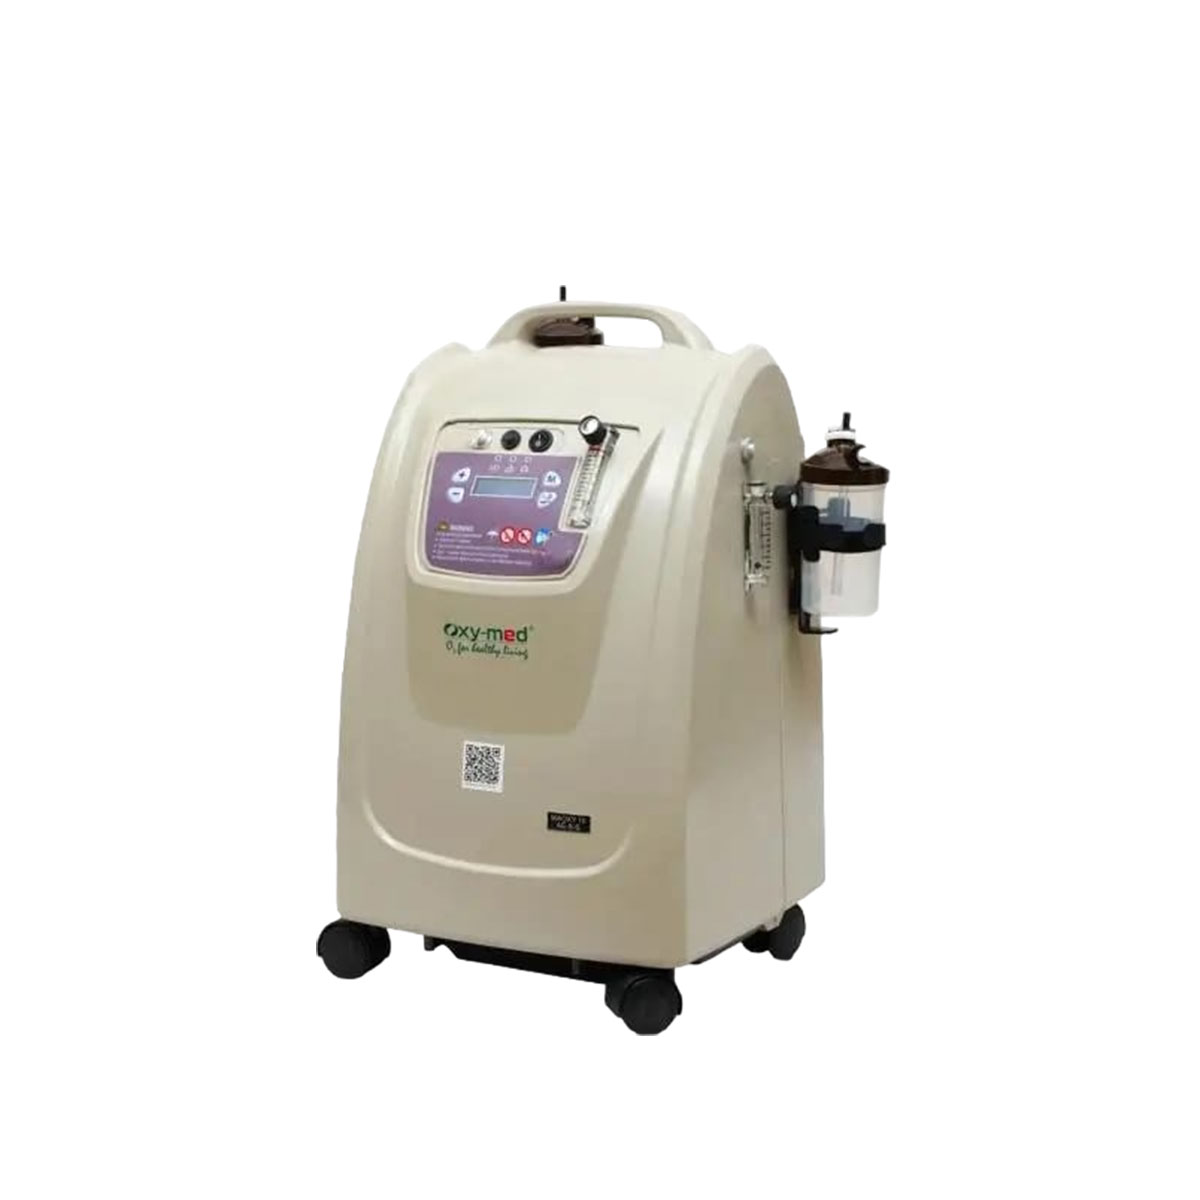 10 Lpm Oxymed Oxygen Concentrator On Sale in Noida